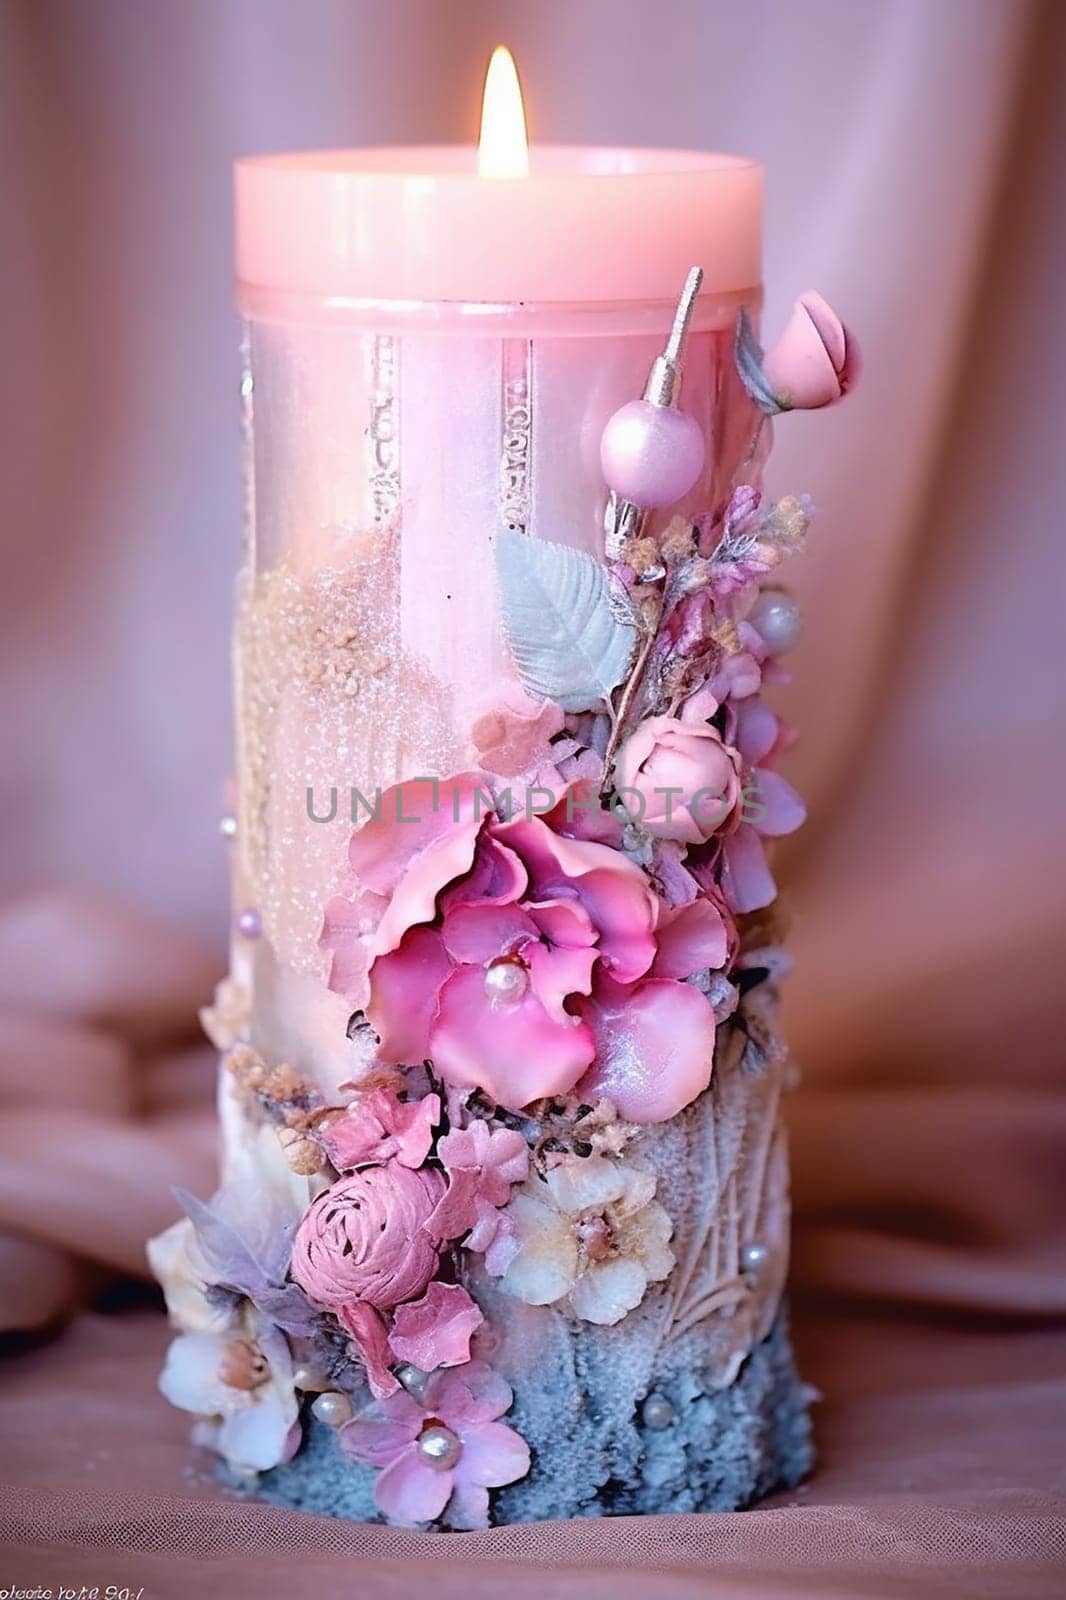 Decorative candle with pink flowers, beads, and rustic wood base. by Hype2art